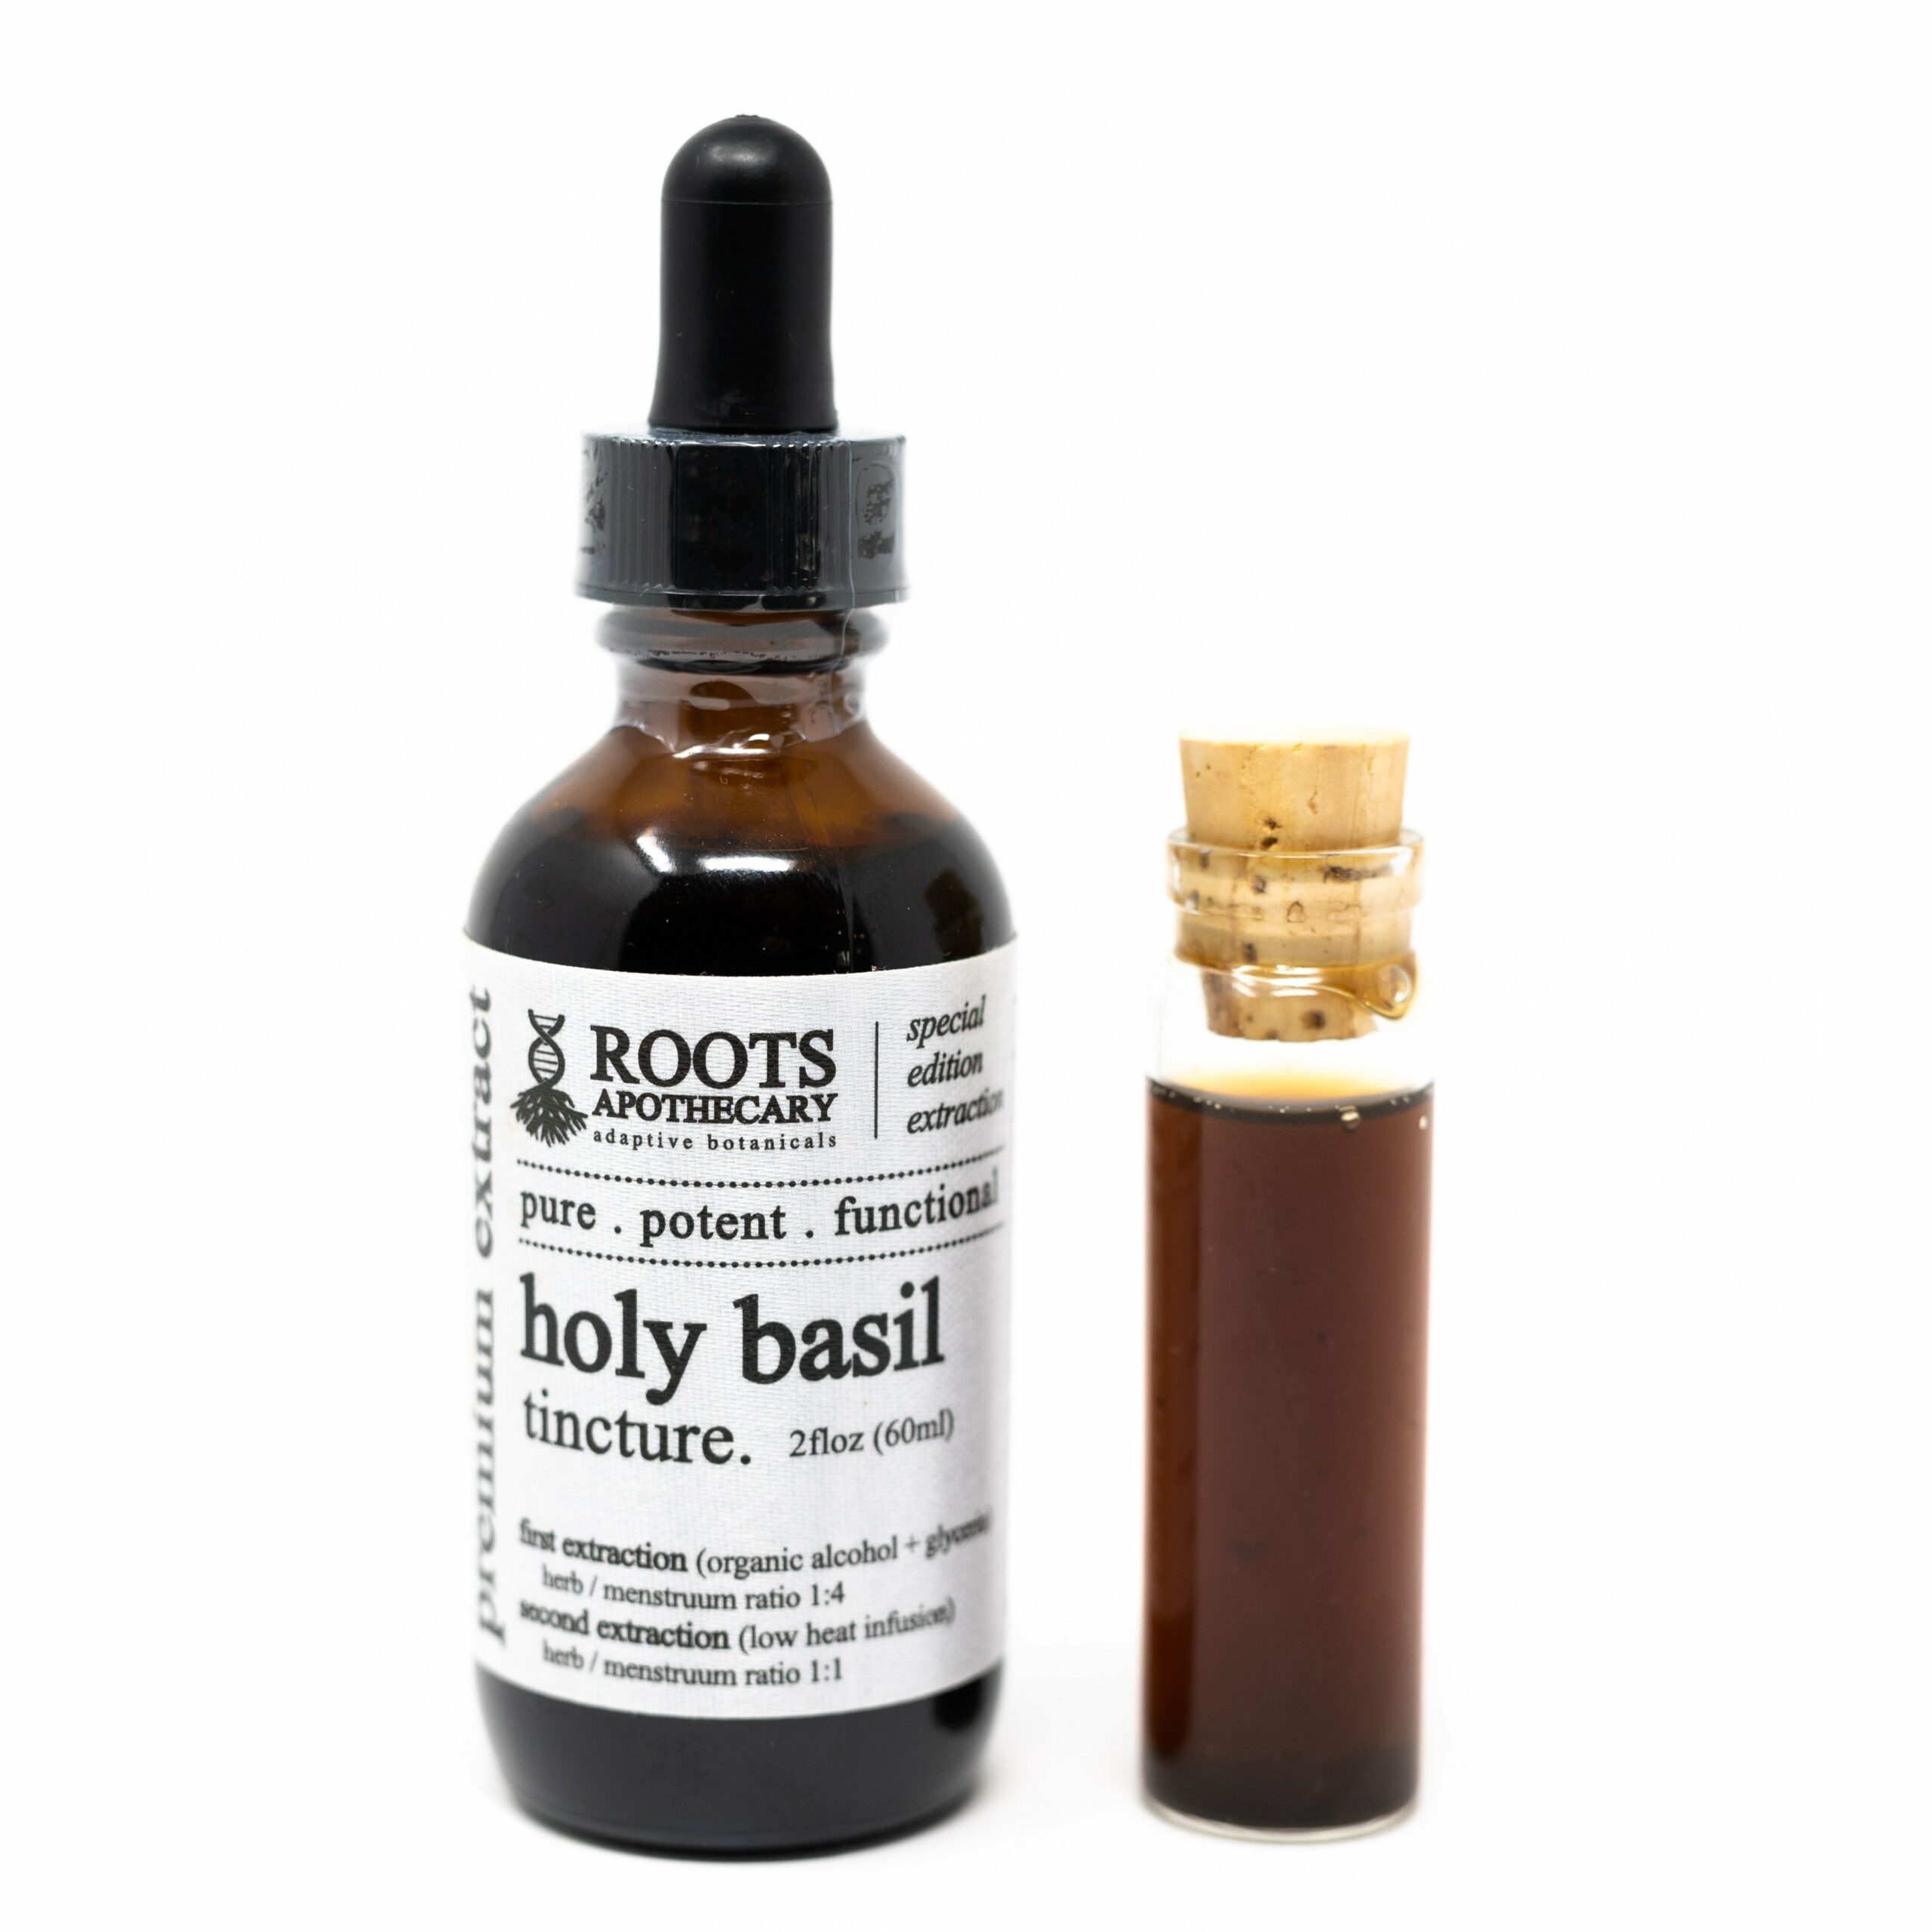 Roots Apothecary Holy Basil Tincture